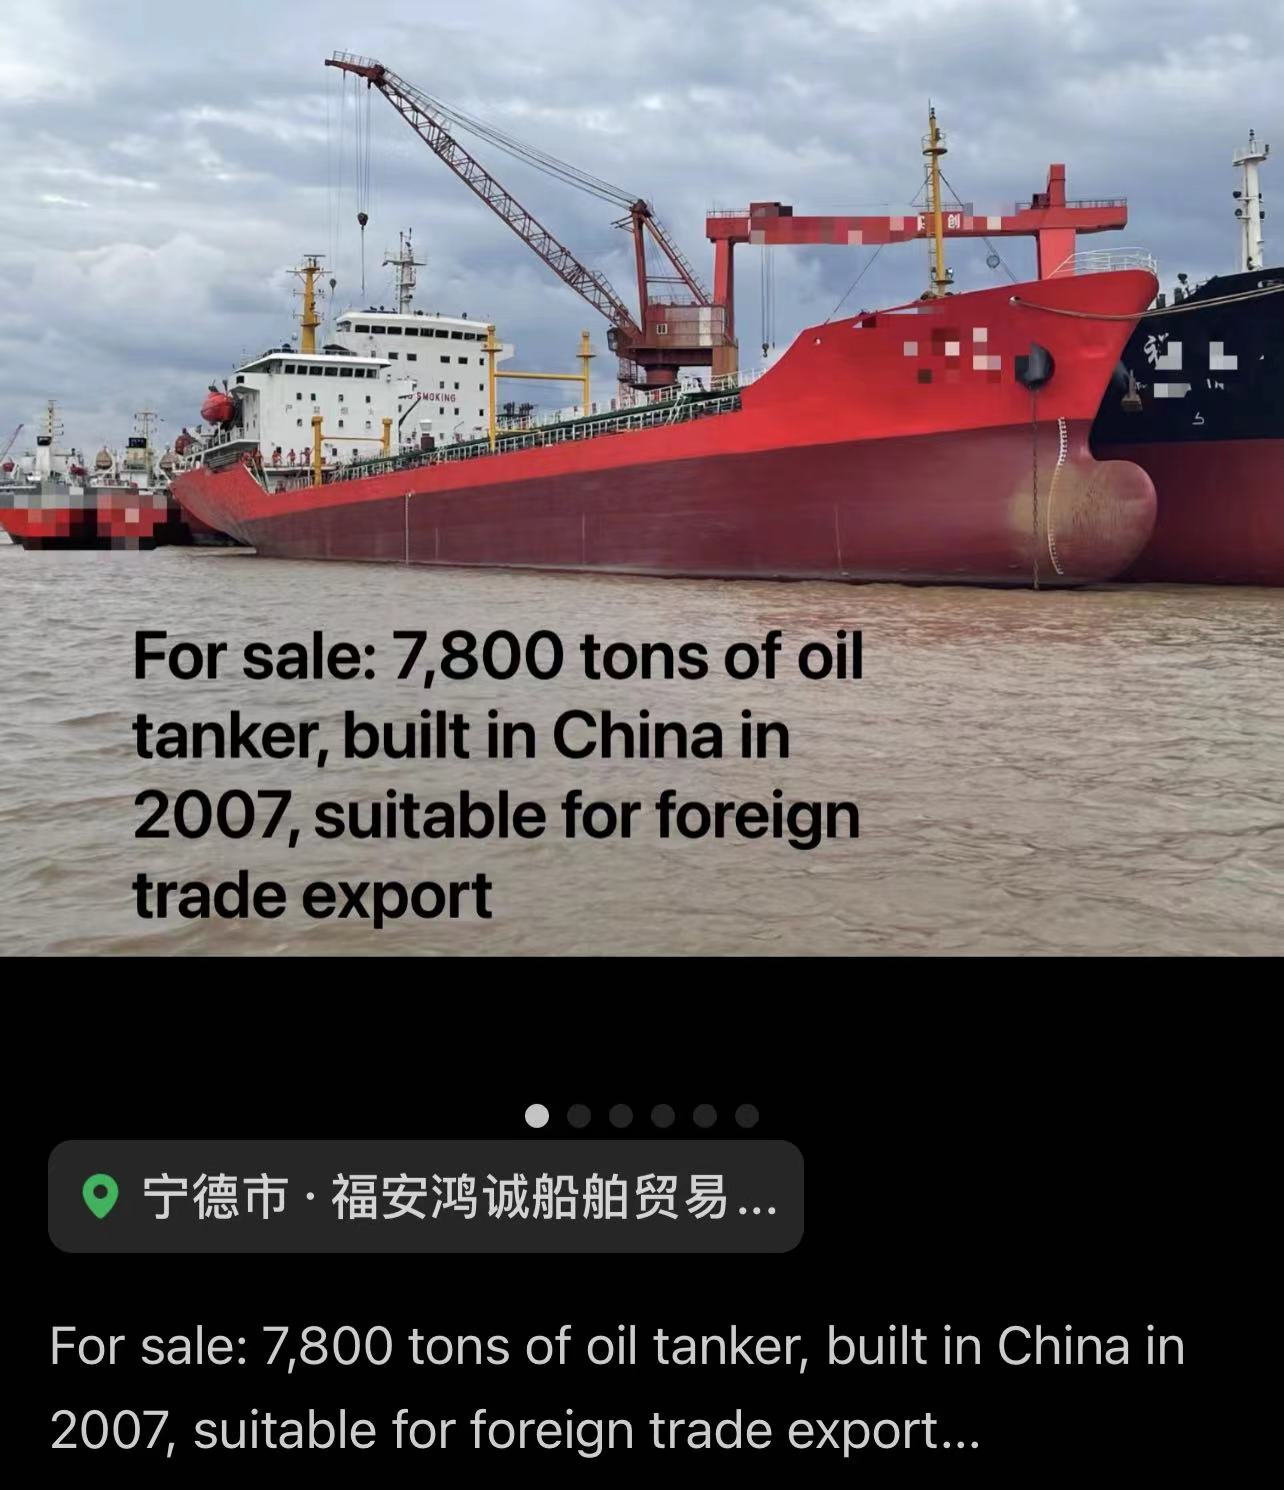 For sale: 7,800 tons of oil tanker, built in China in 2007, suitable for foreign trade export